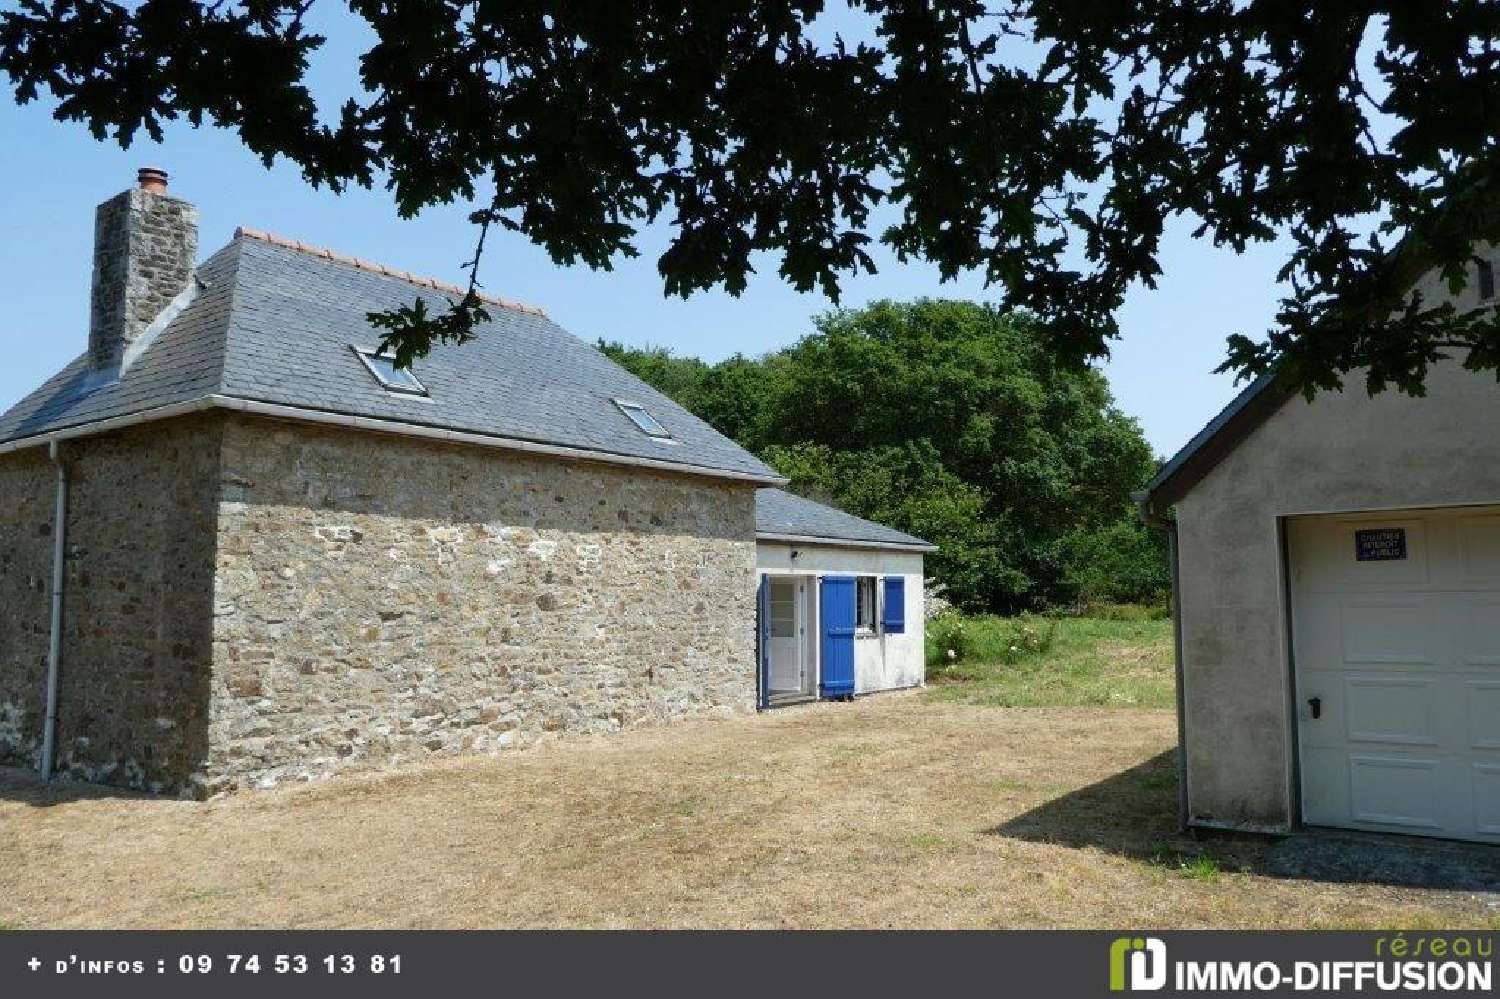  for sale house Plougonven Finistère 3